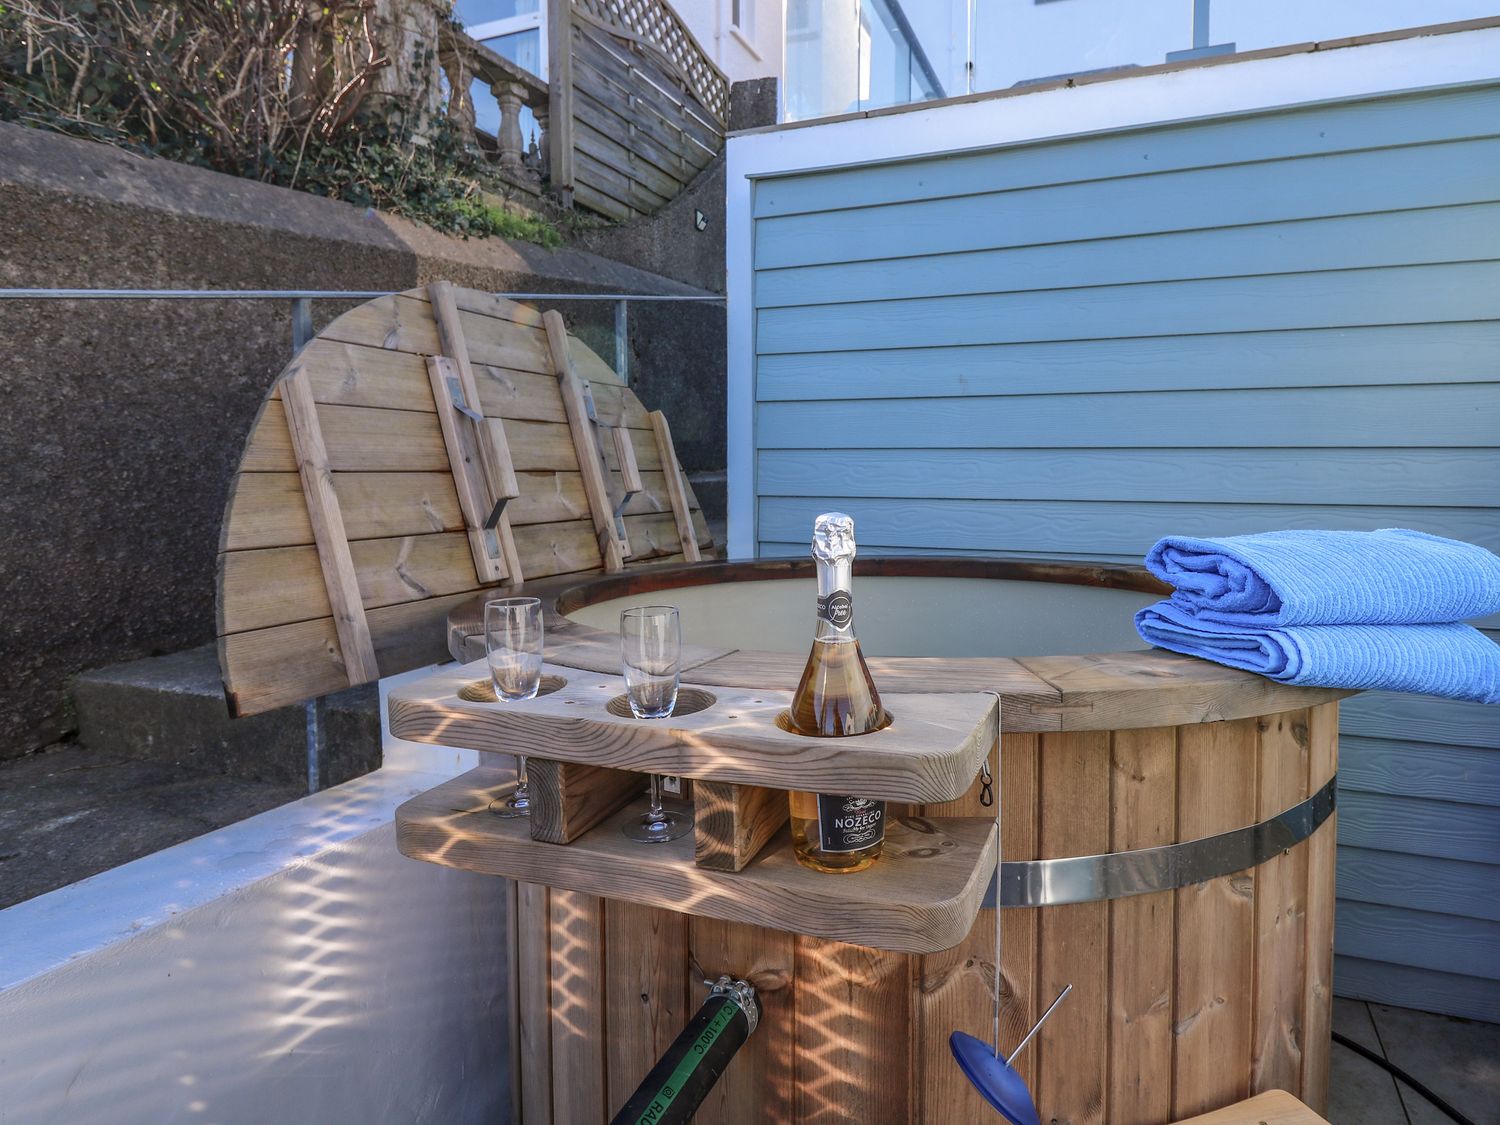 Fronwig is located in New Quay, Ceredigion. Four-bedroom home with sea views and wood-fired hot tub.